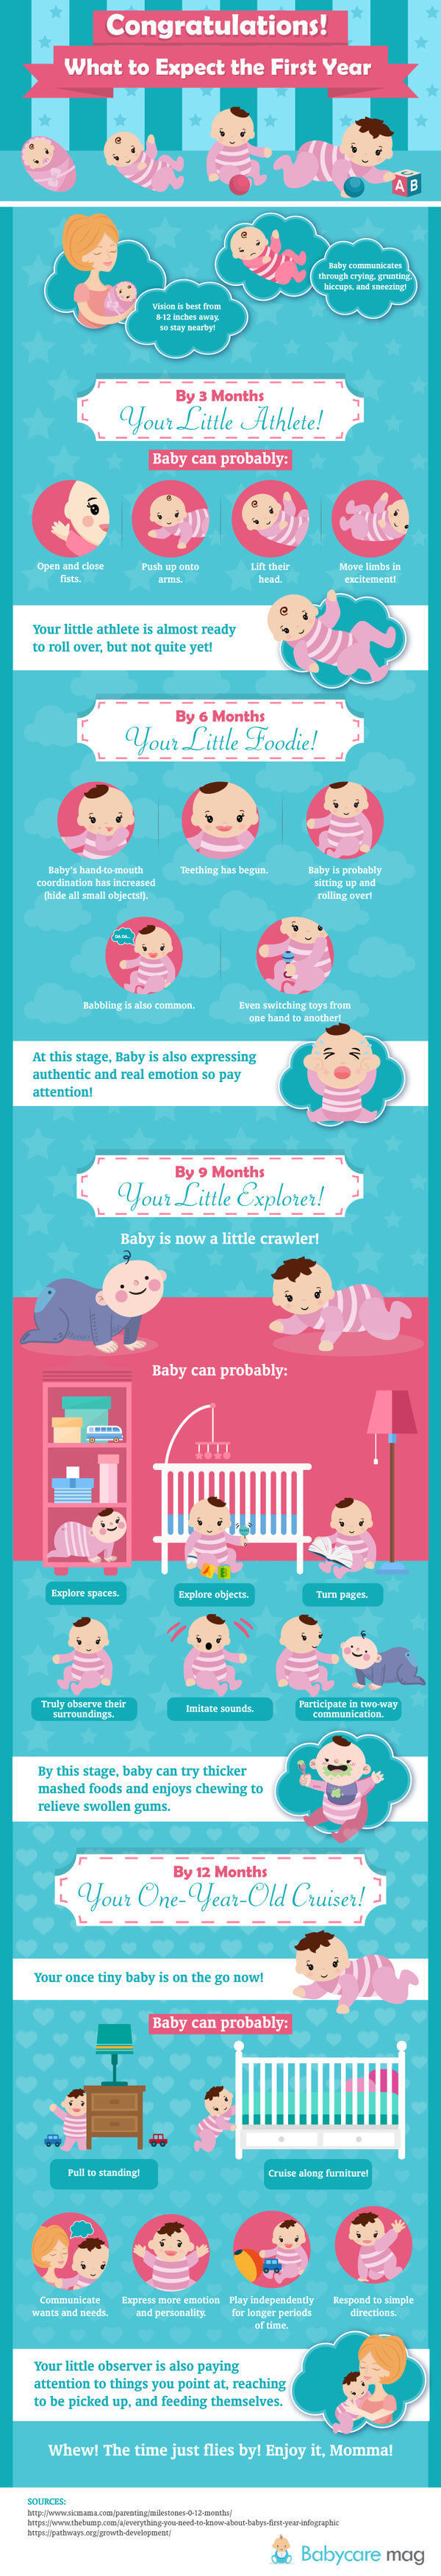 Baby Milestones: What to Expect the First Year